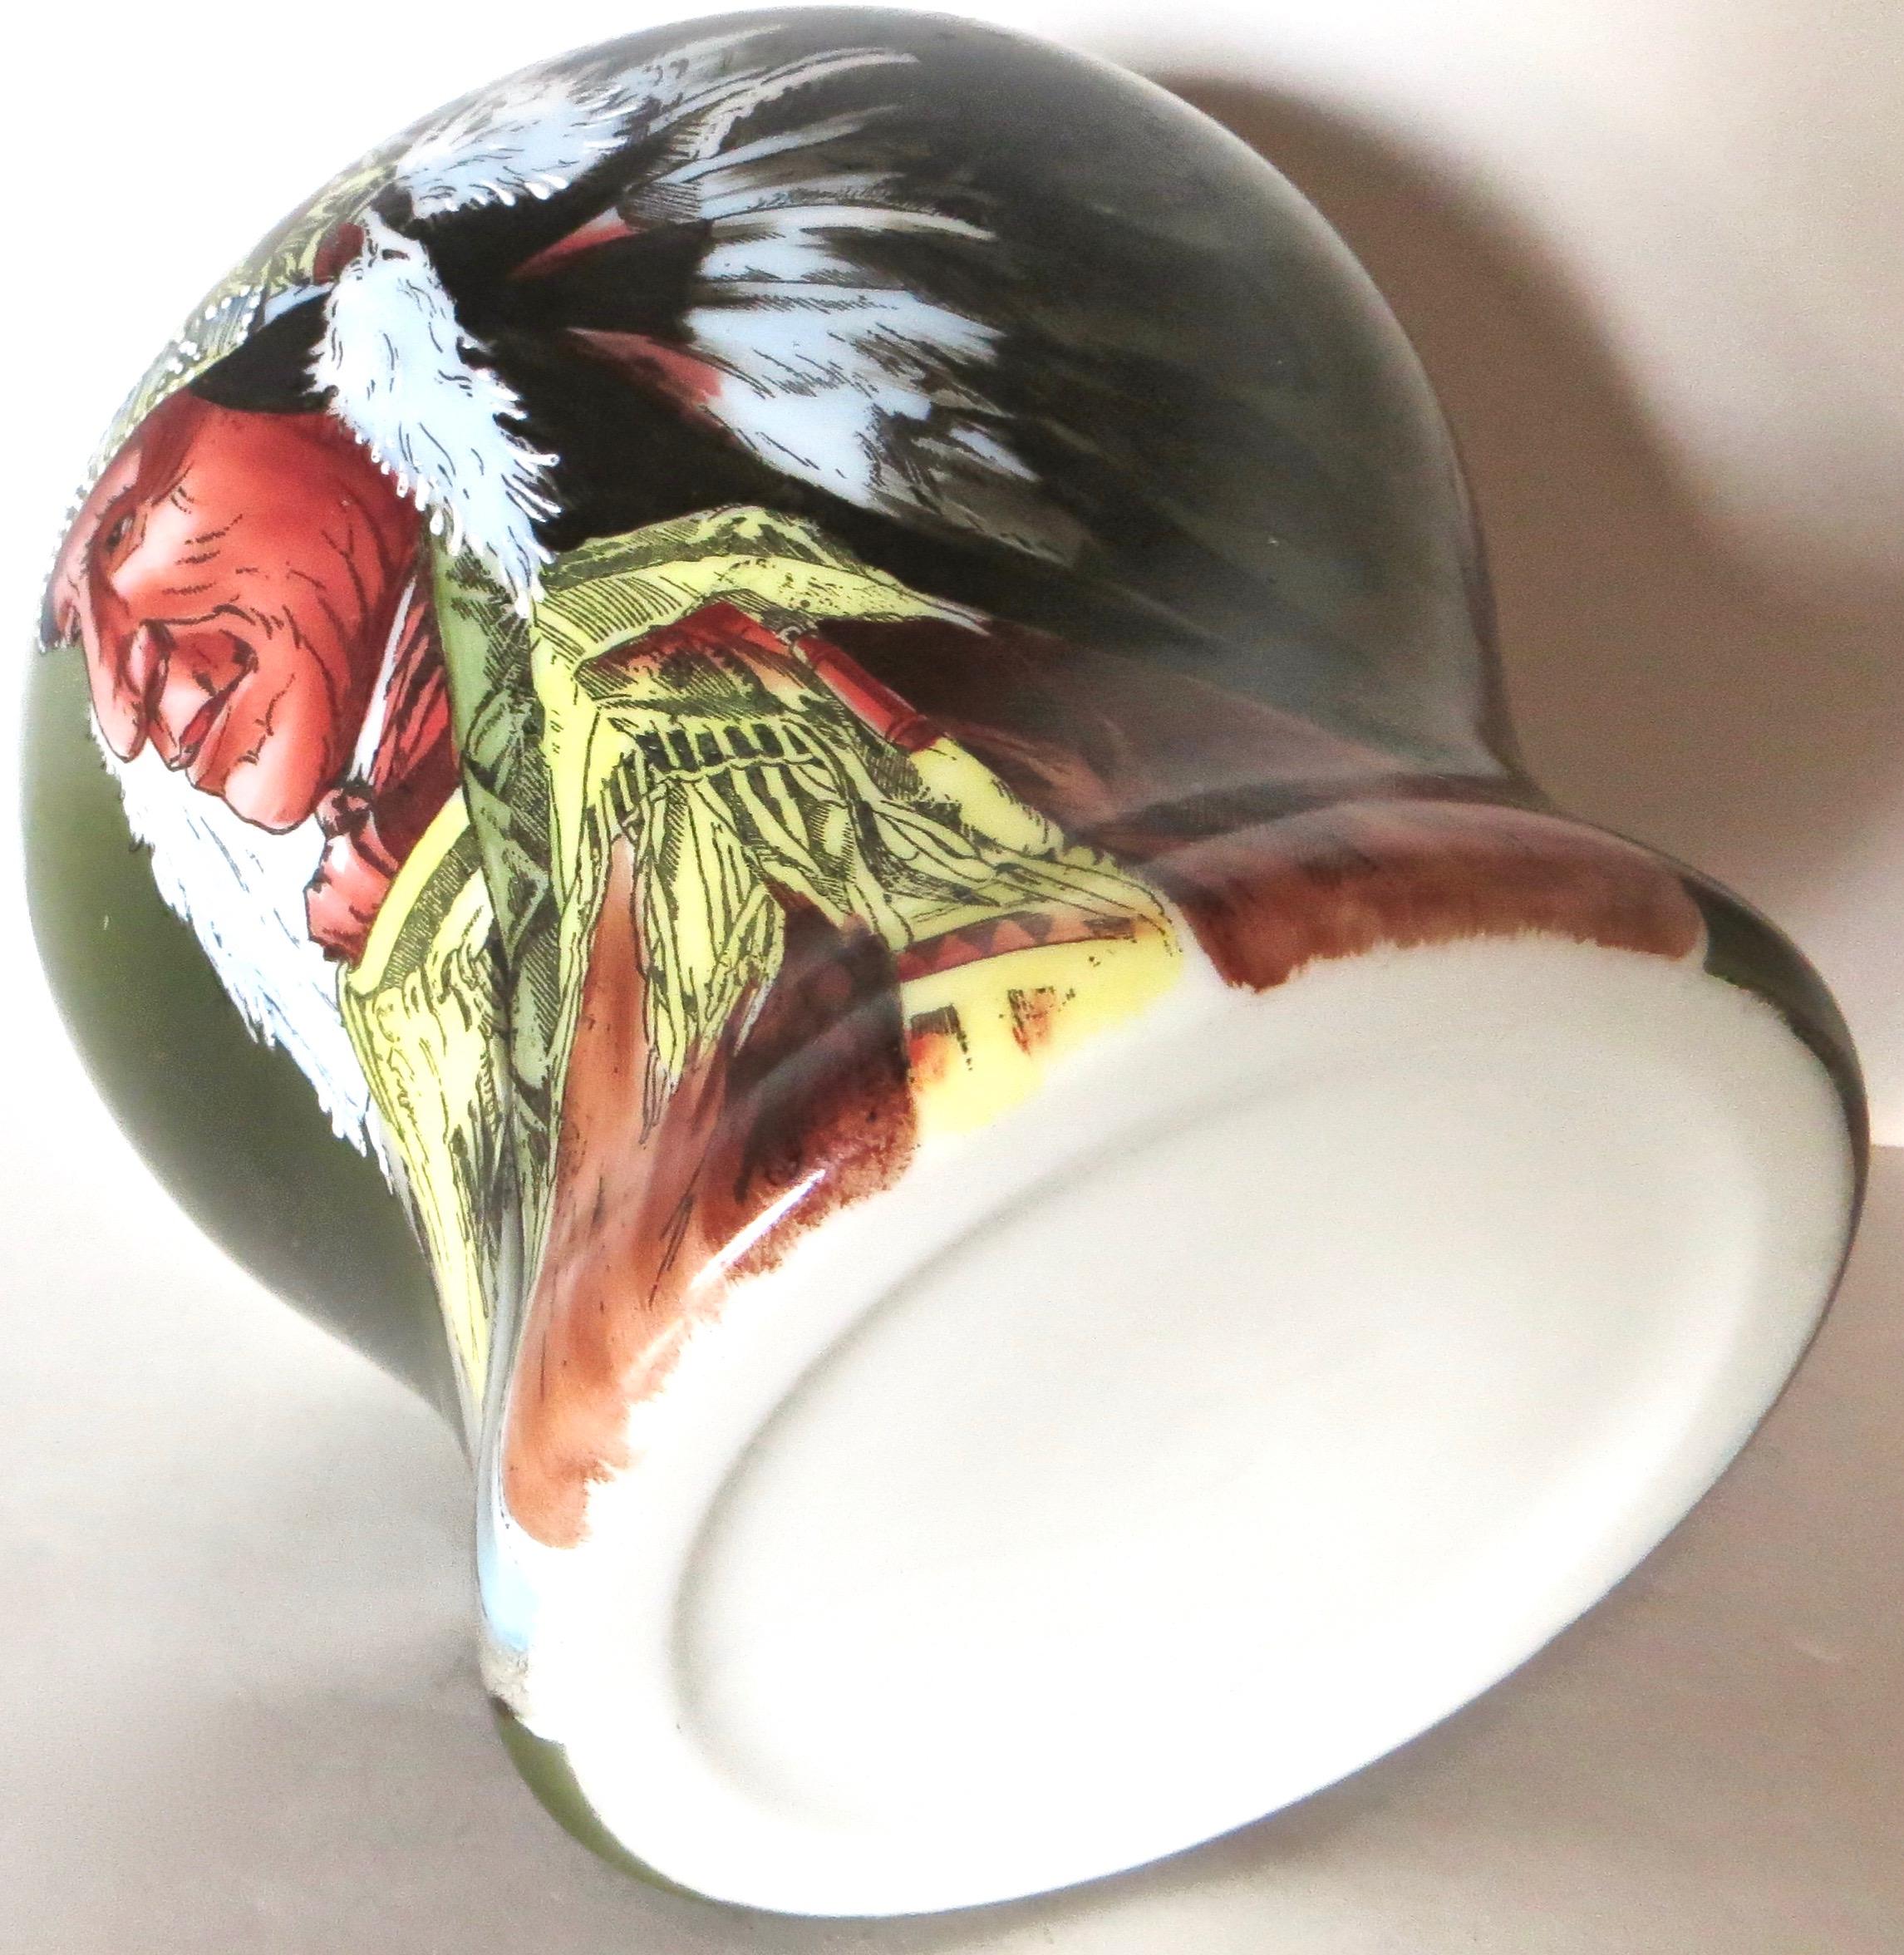 Fine quality hand painted porcelain humidor is in excellent all original condition with no chips, repairs, or overpaint; nice bright crisp paint and detail. No mark, but definitely American, circa 1900 era. Note the detail to the Indian's face and